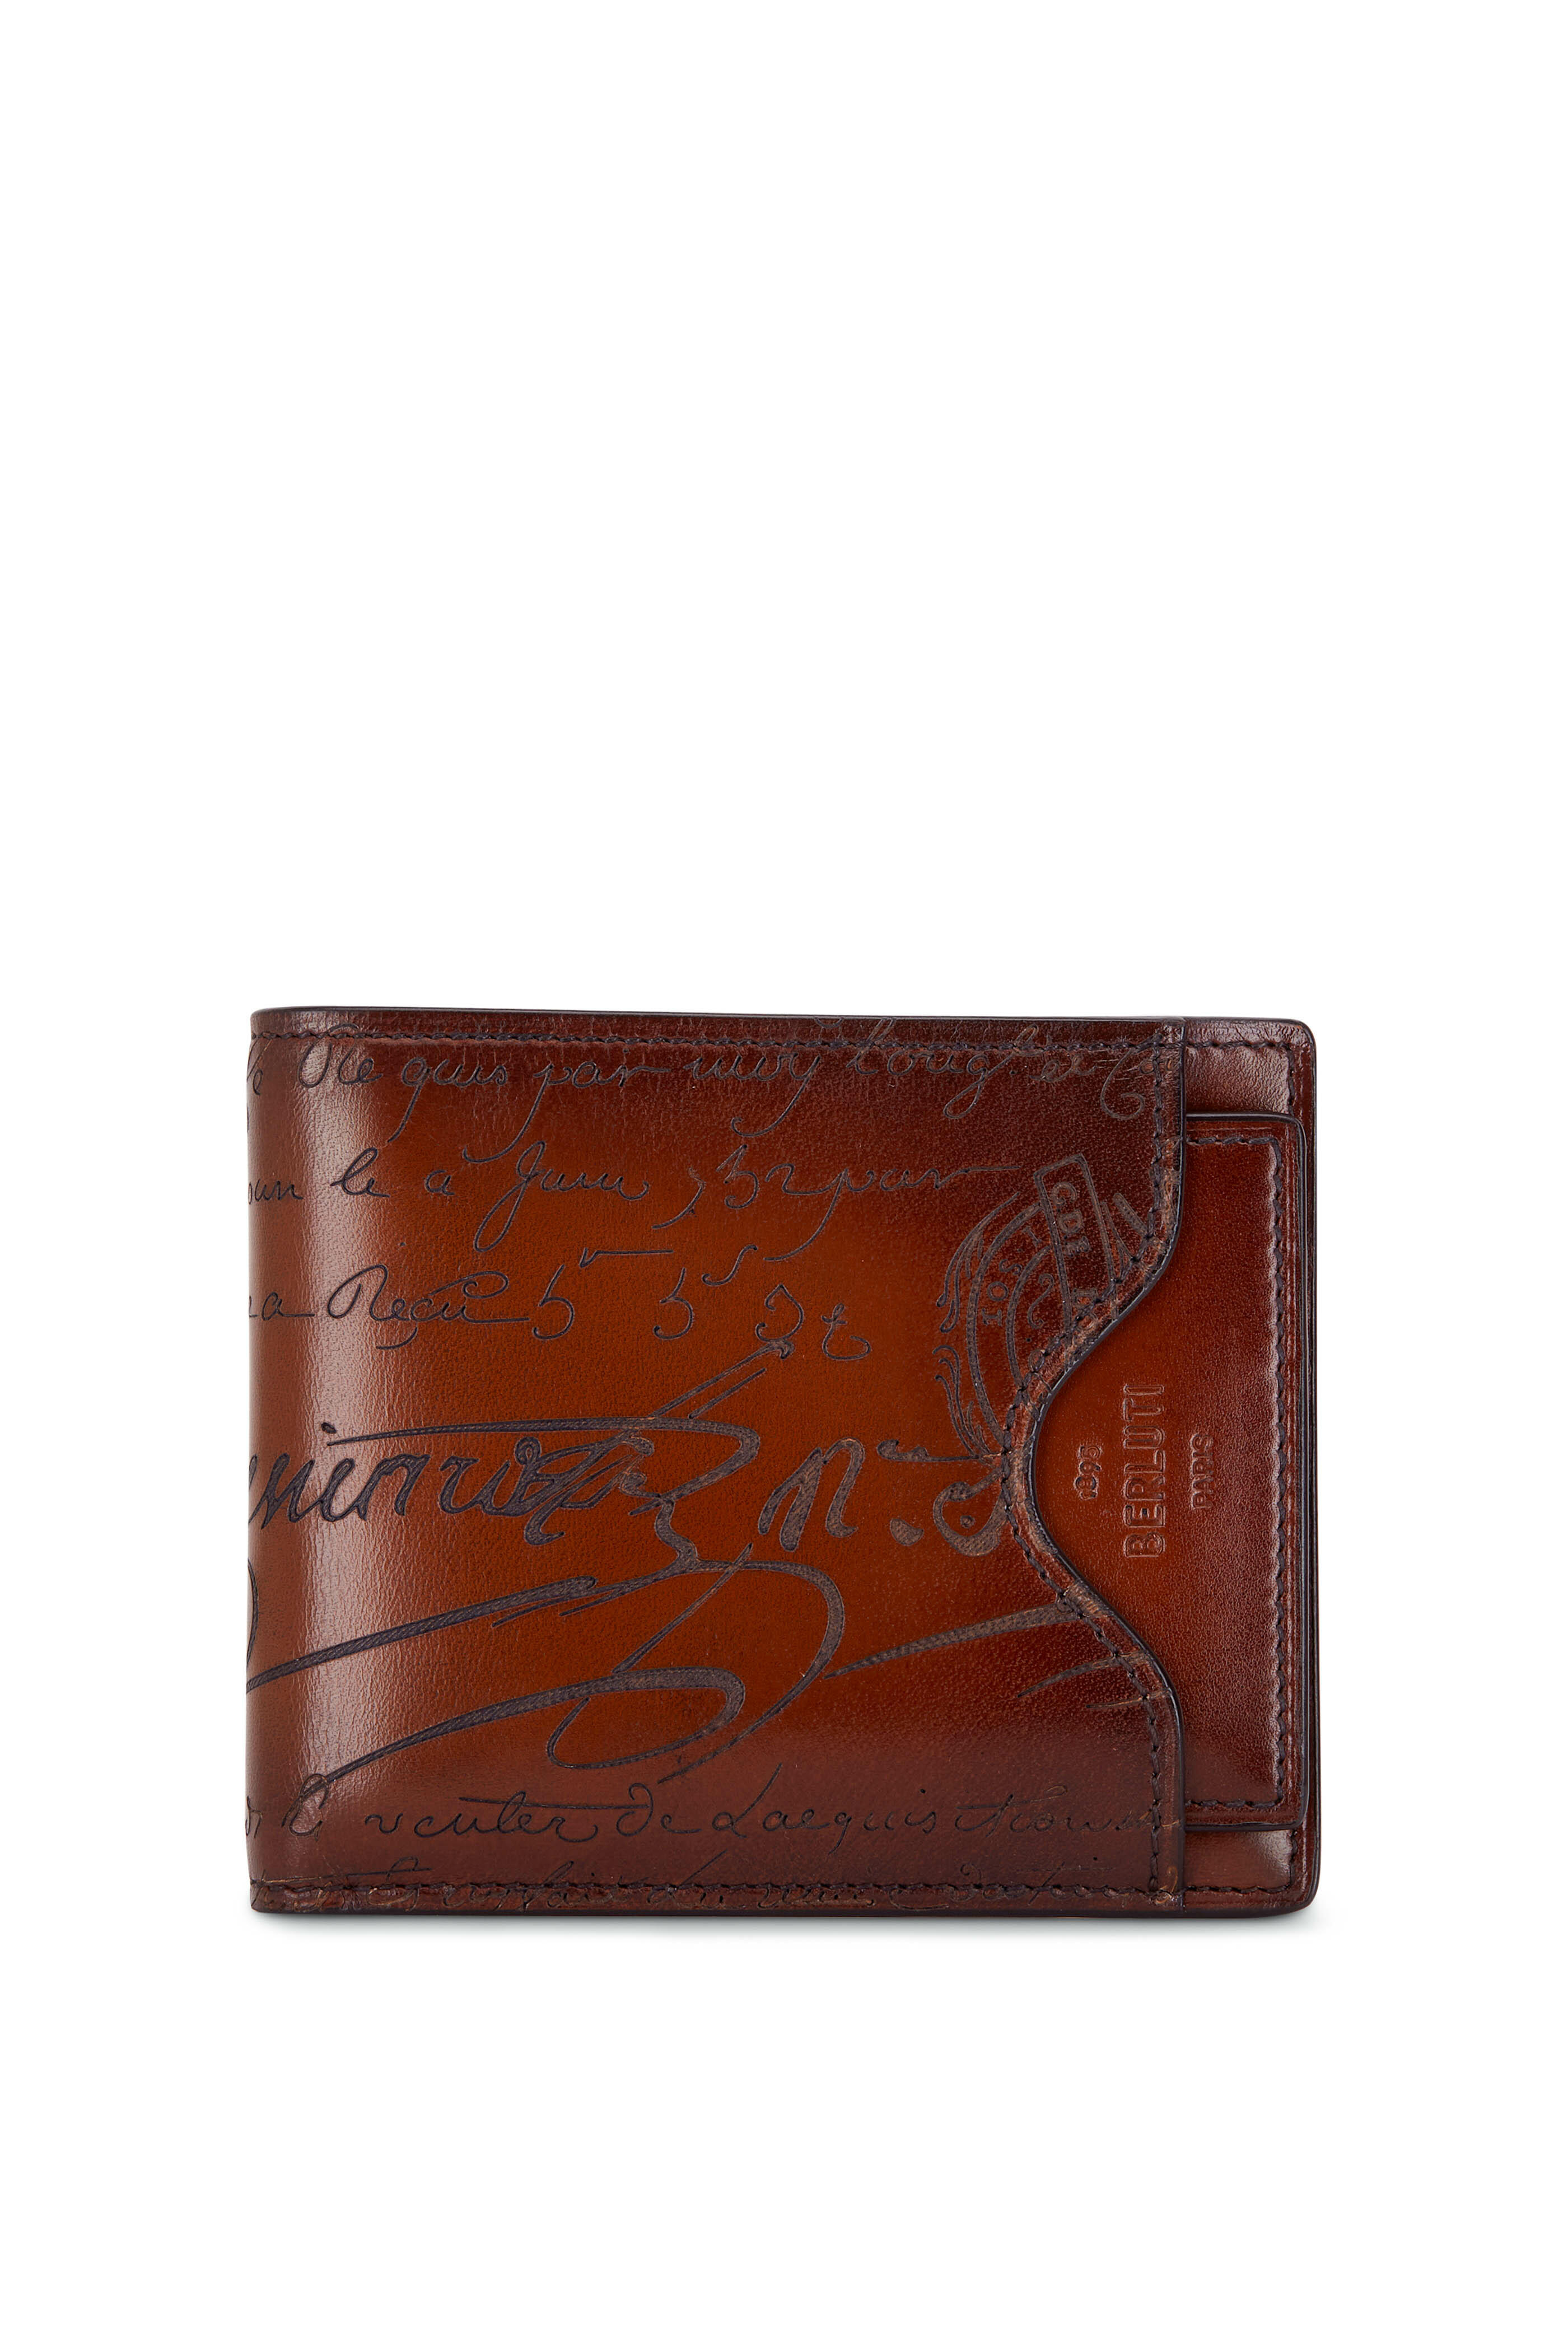 Berluti - Makore Scritto Cacao Leather Two in One Wallet